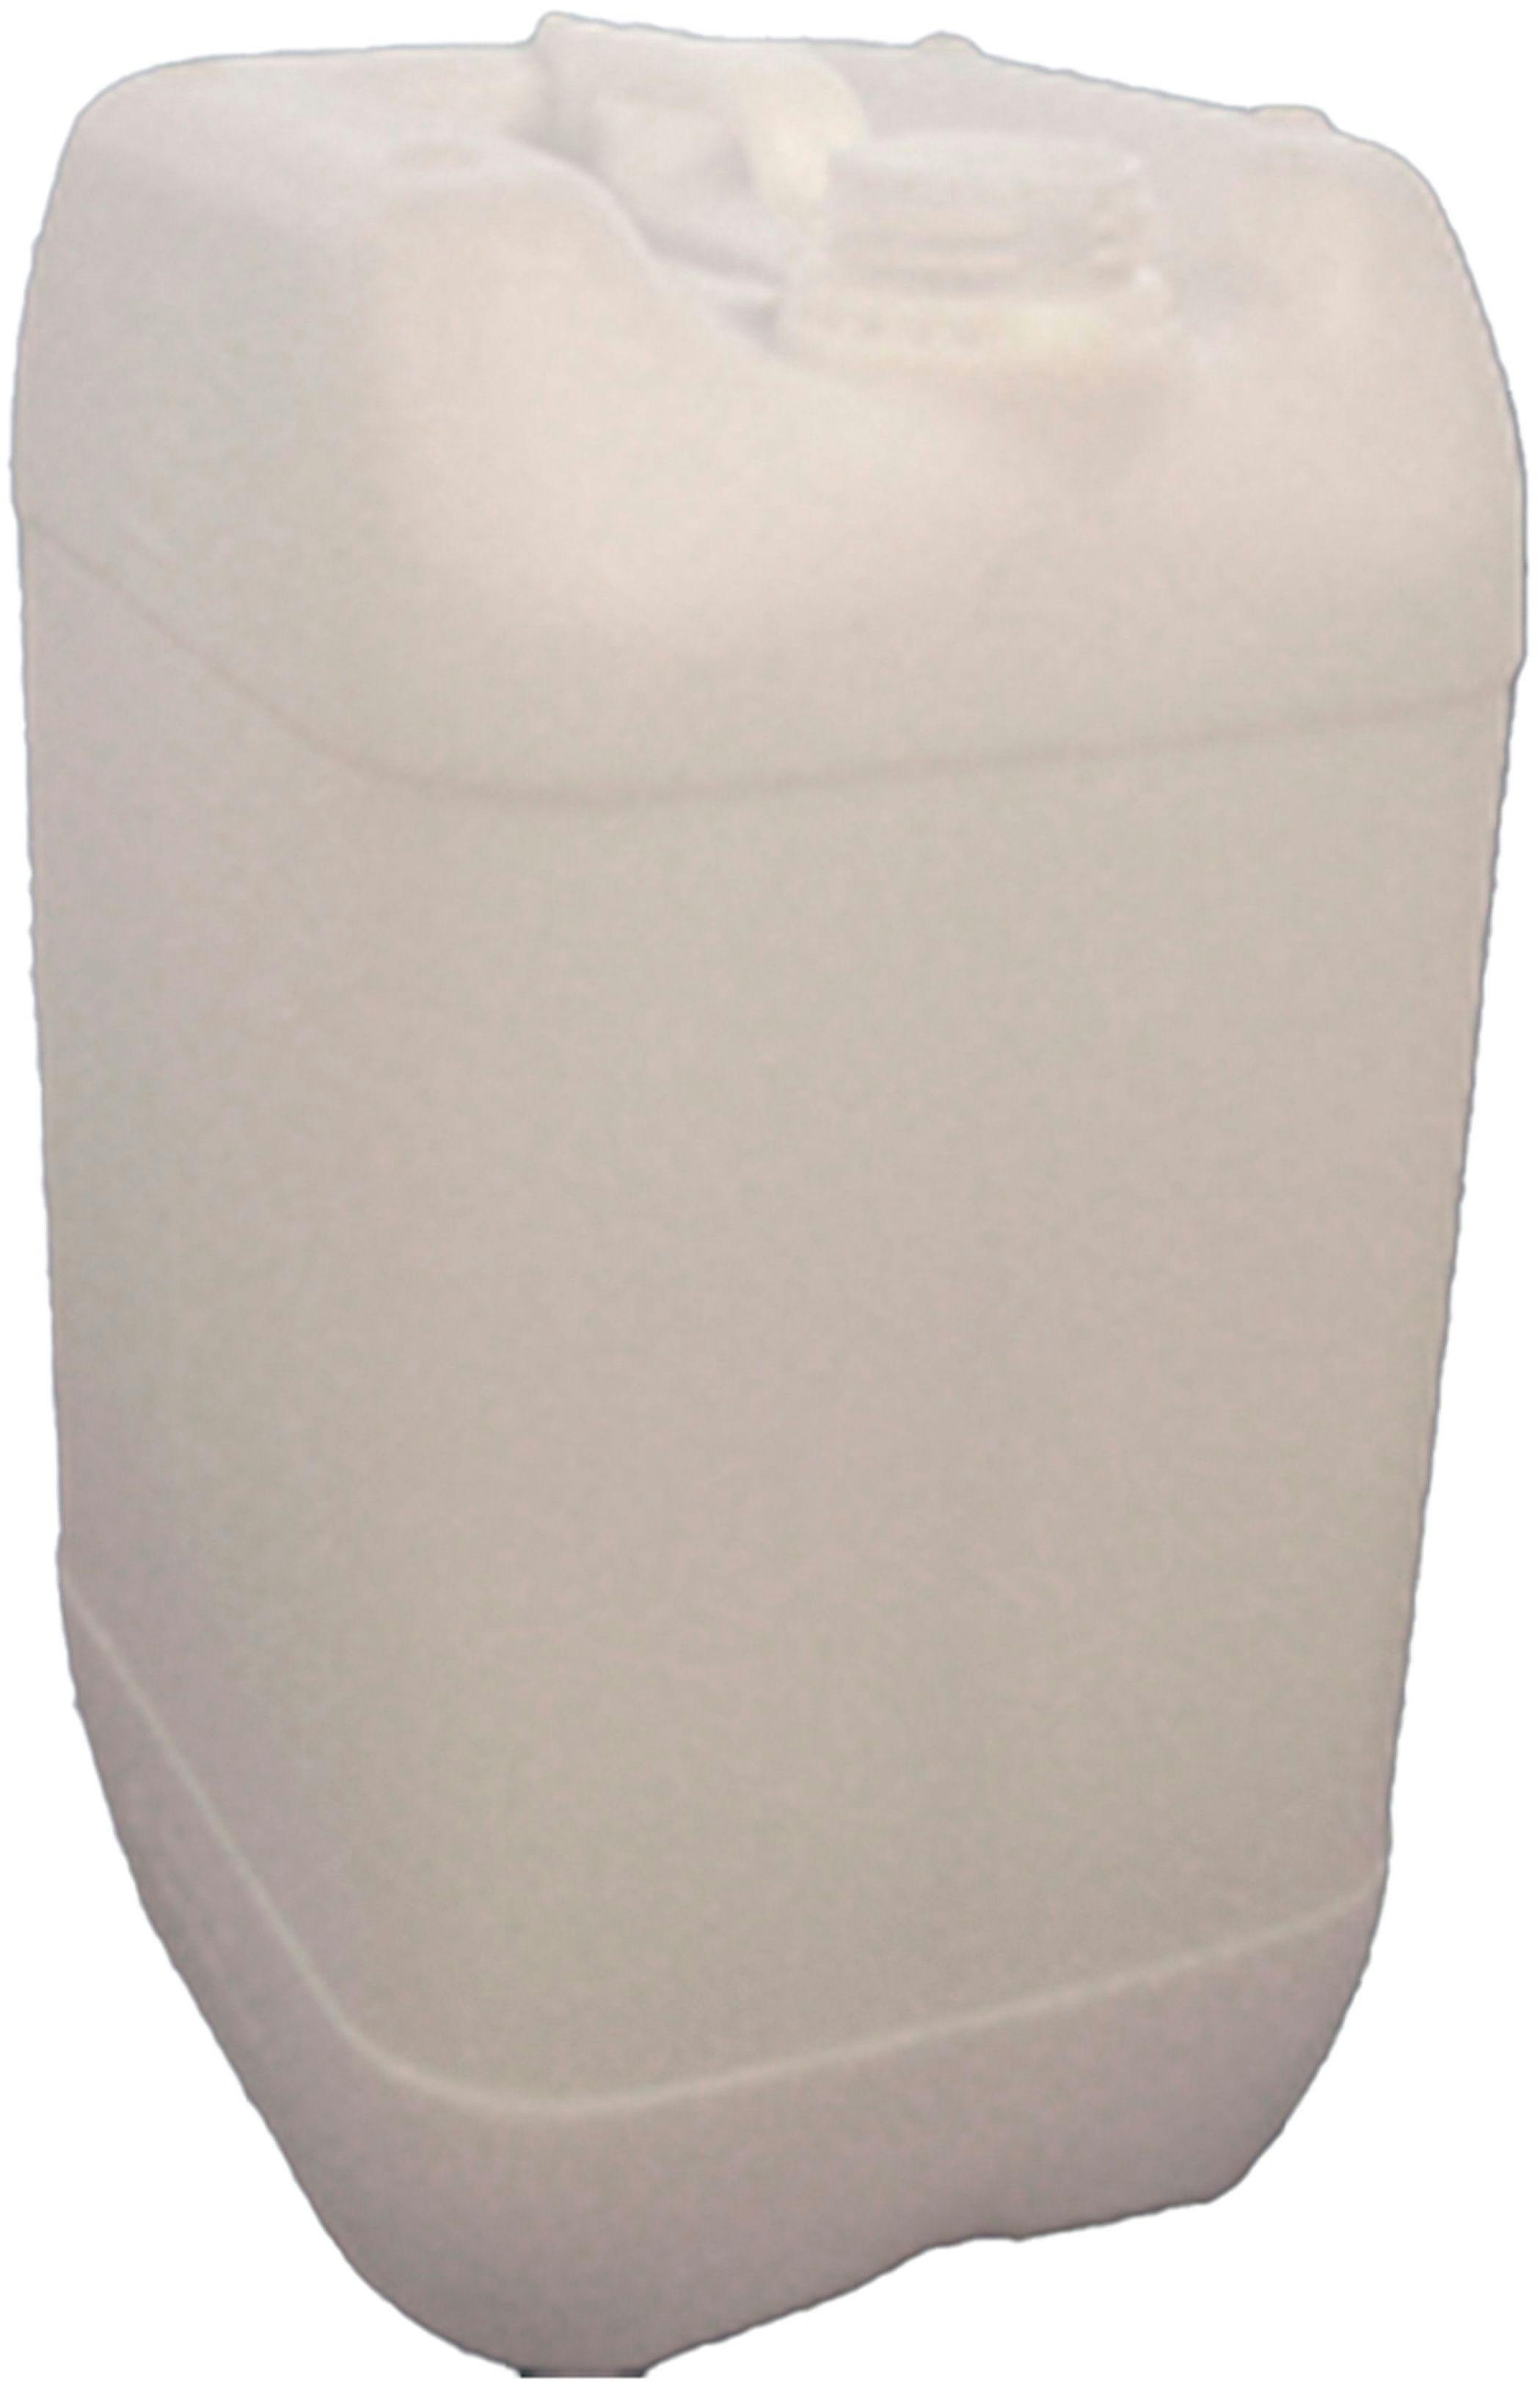 Jerrican stackable HDPE 25 liters natural approved  D61